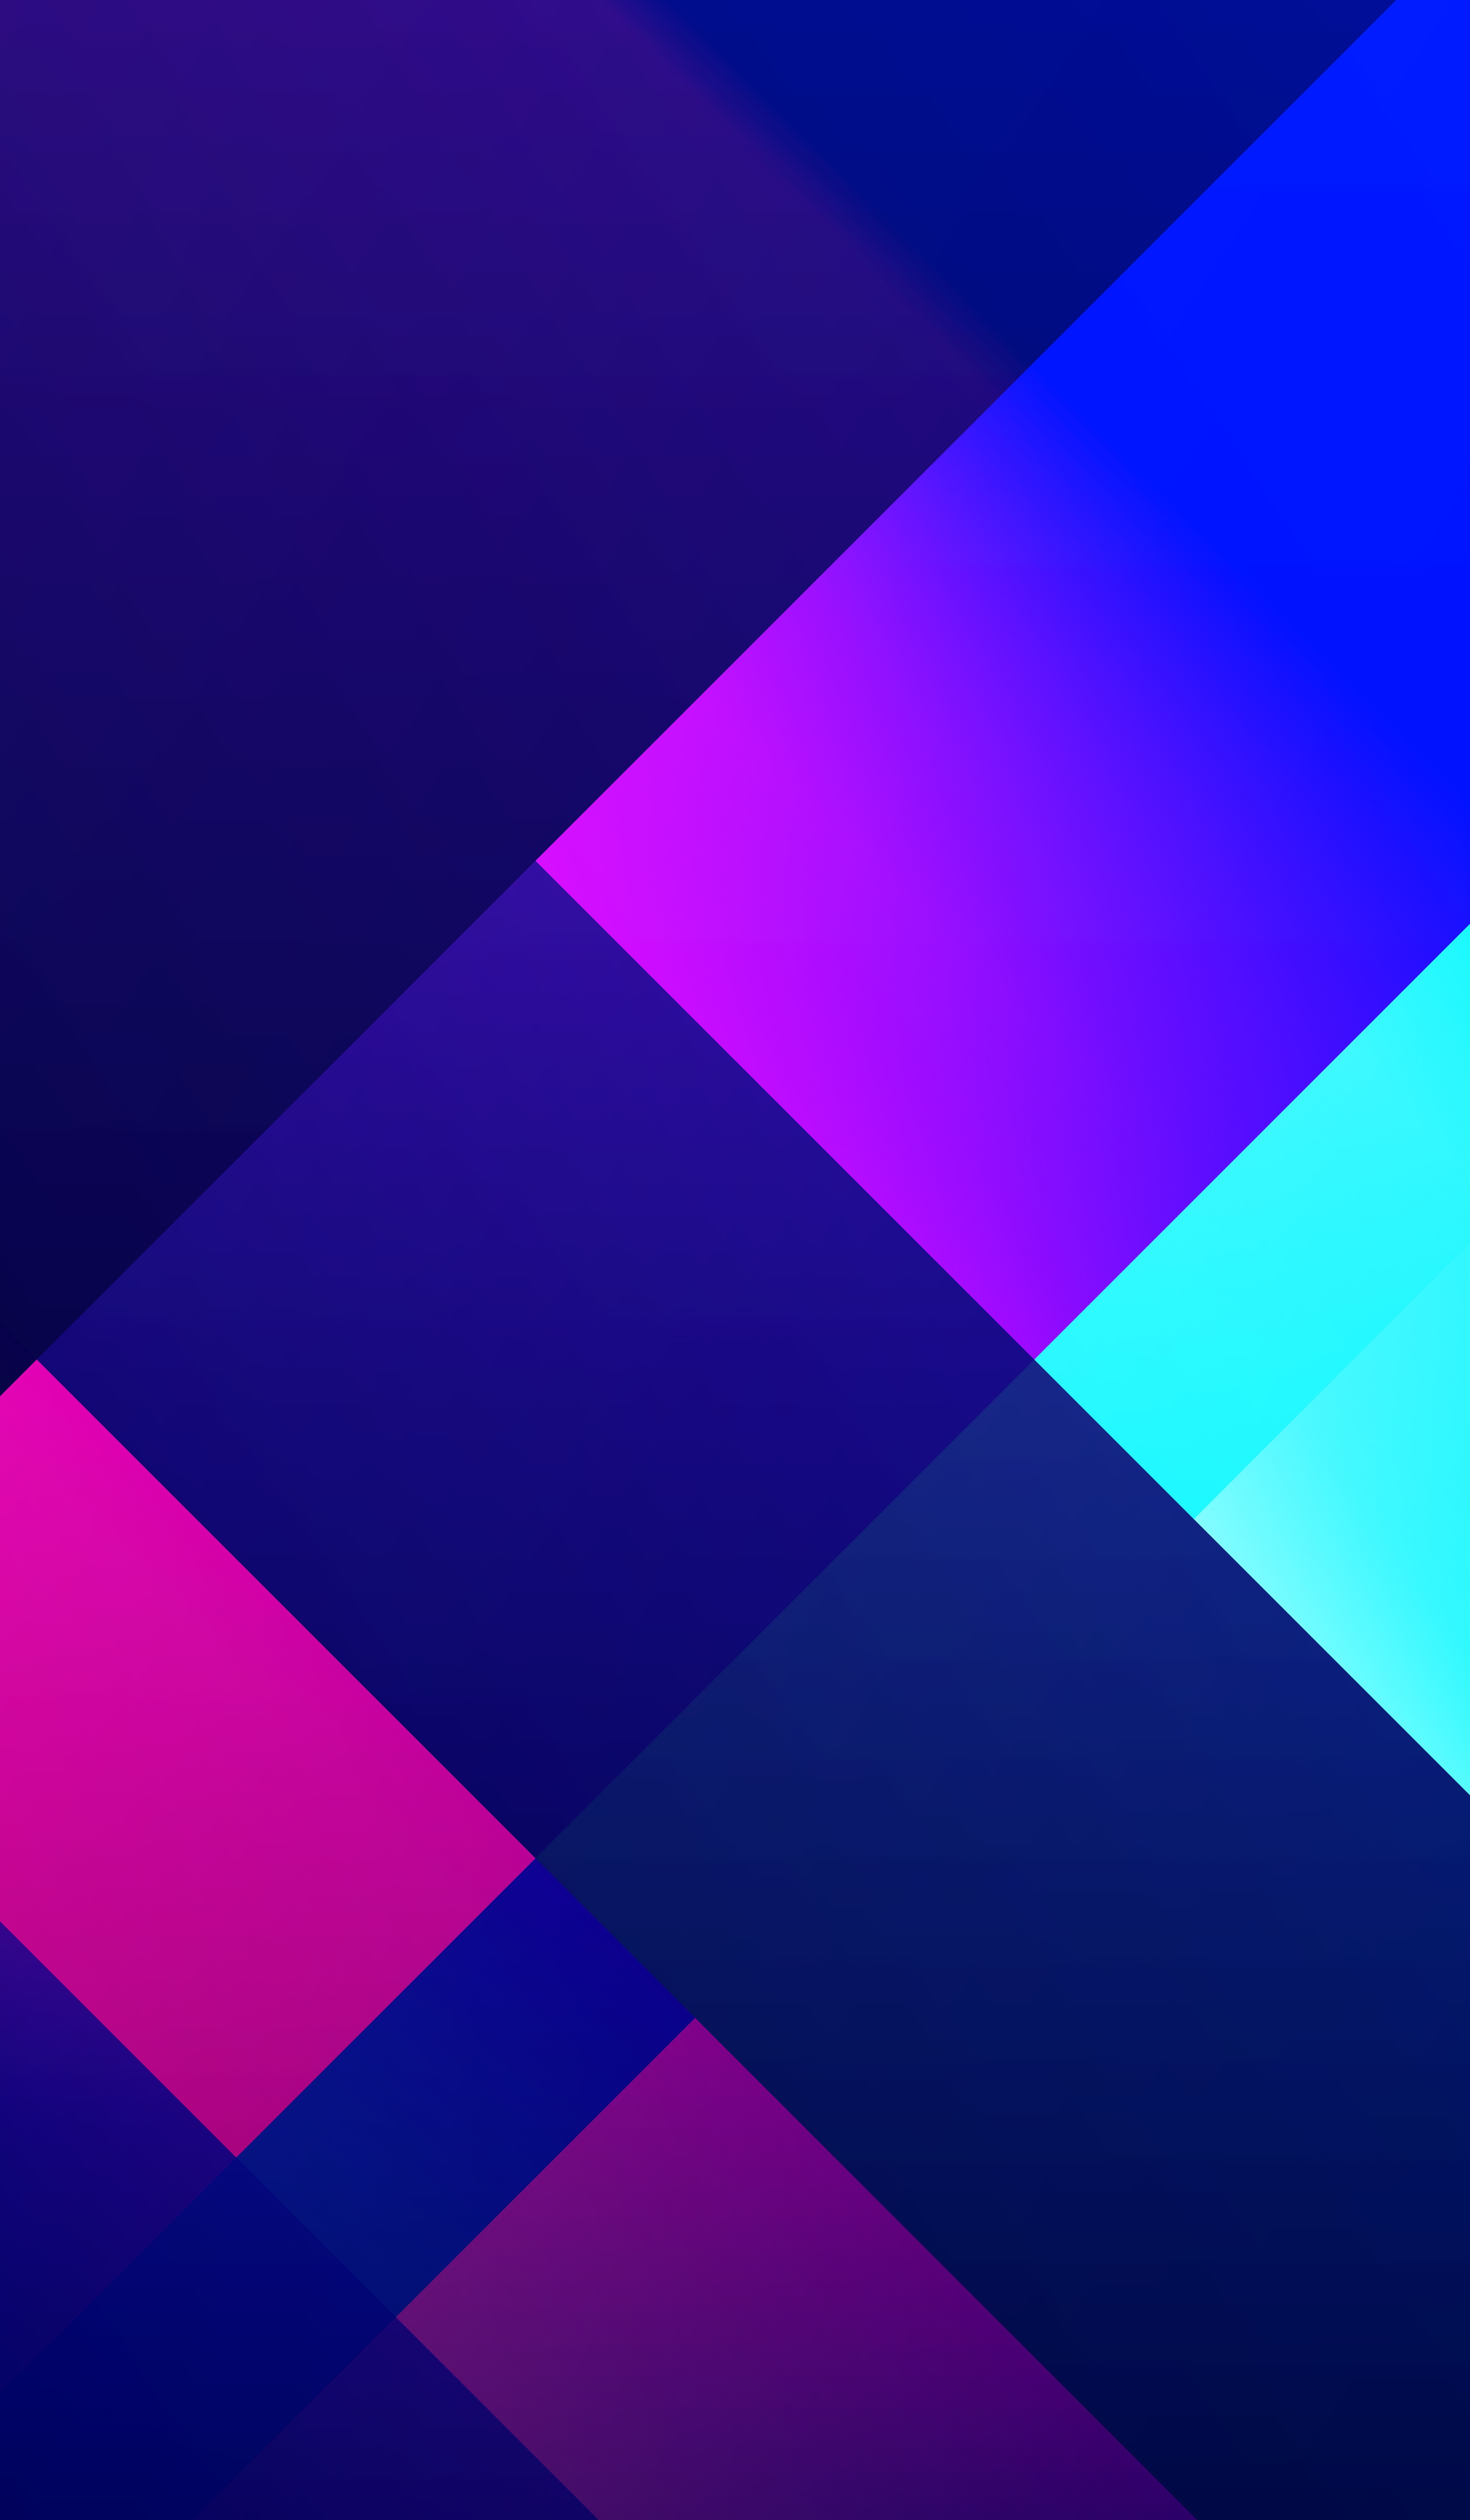 motley, geometry, gradient, abstract, multicolored